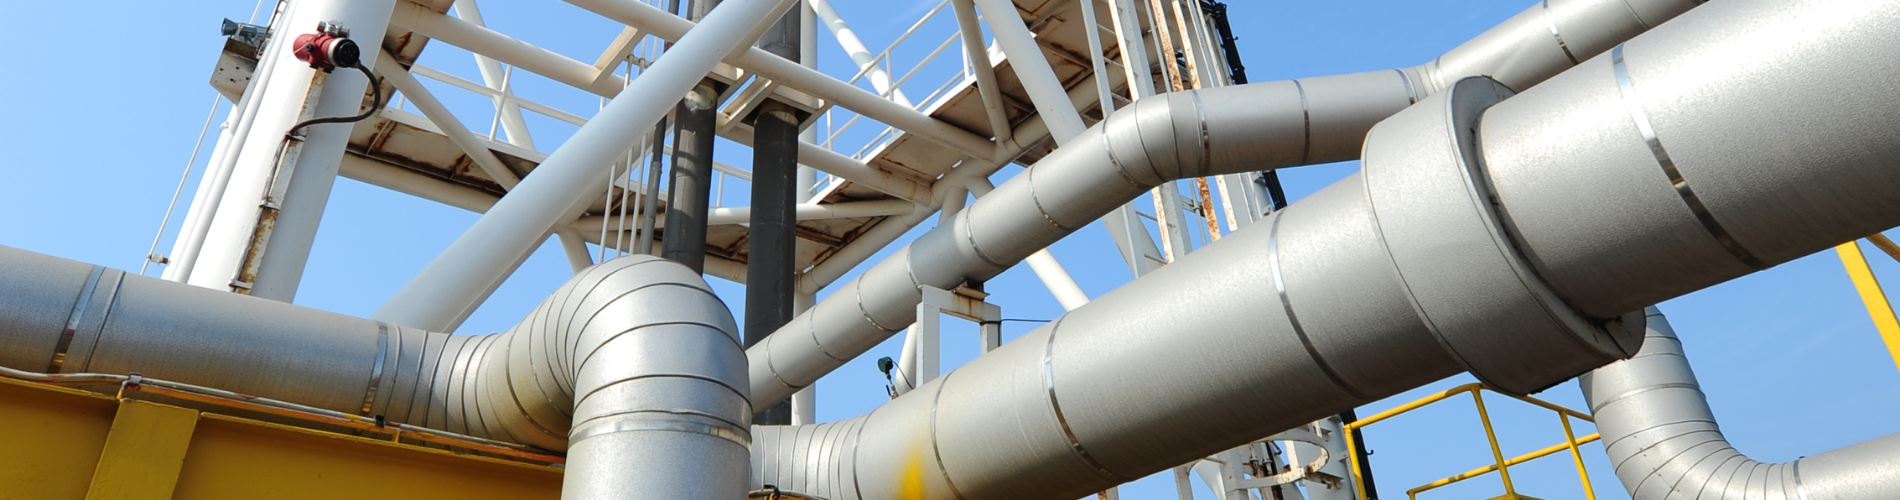 oil and gas corrosion protection